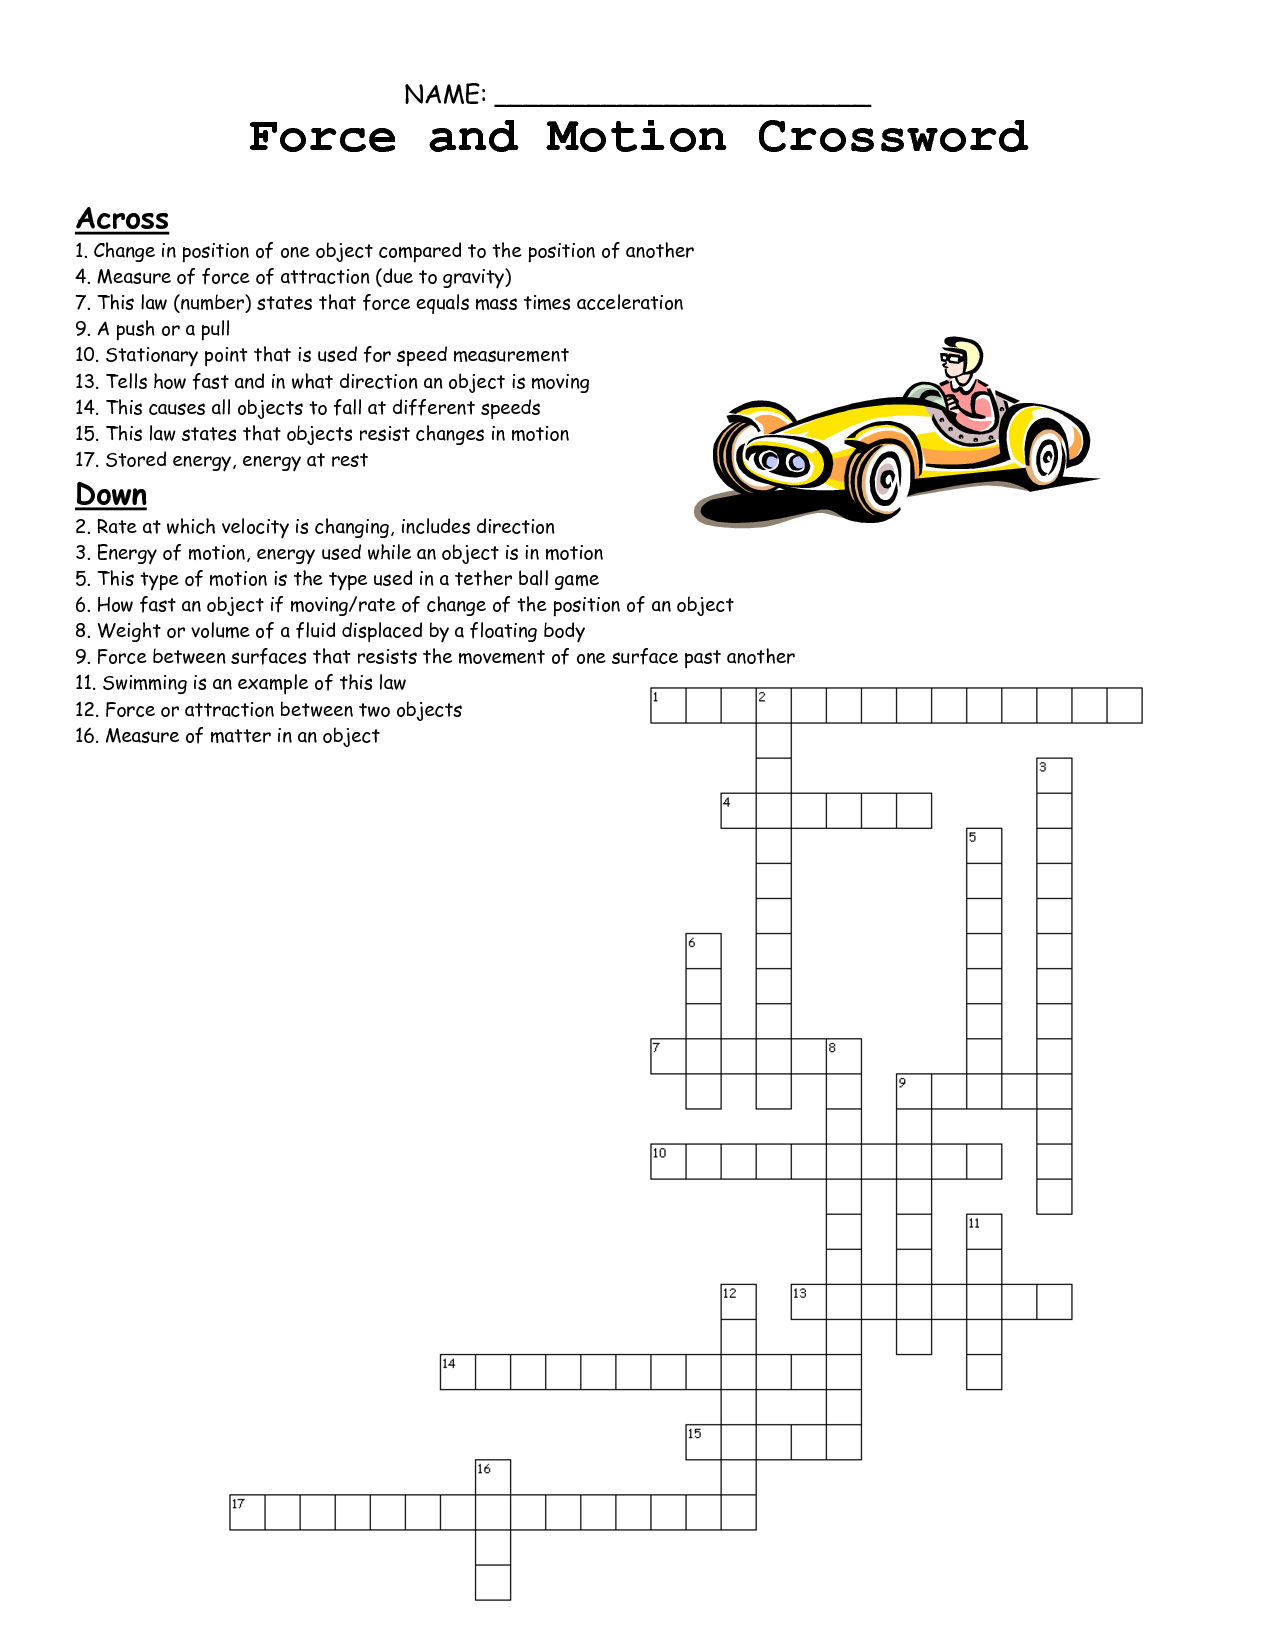 Force and Motion Crossword Puzzle Image